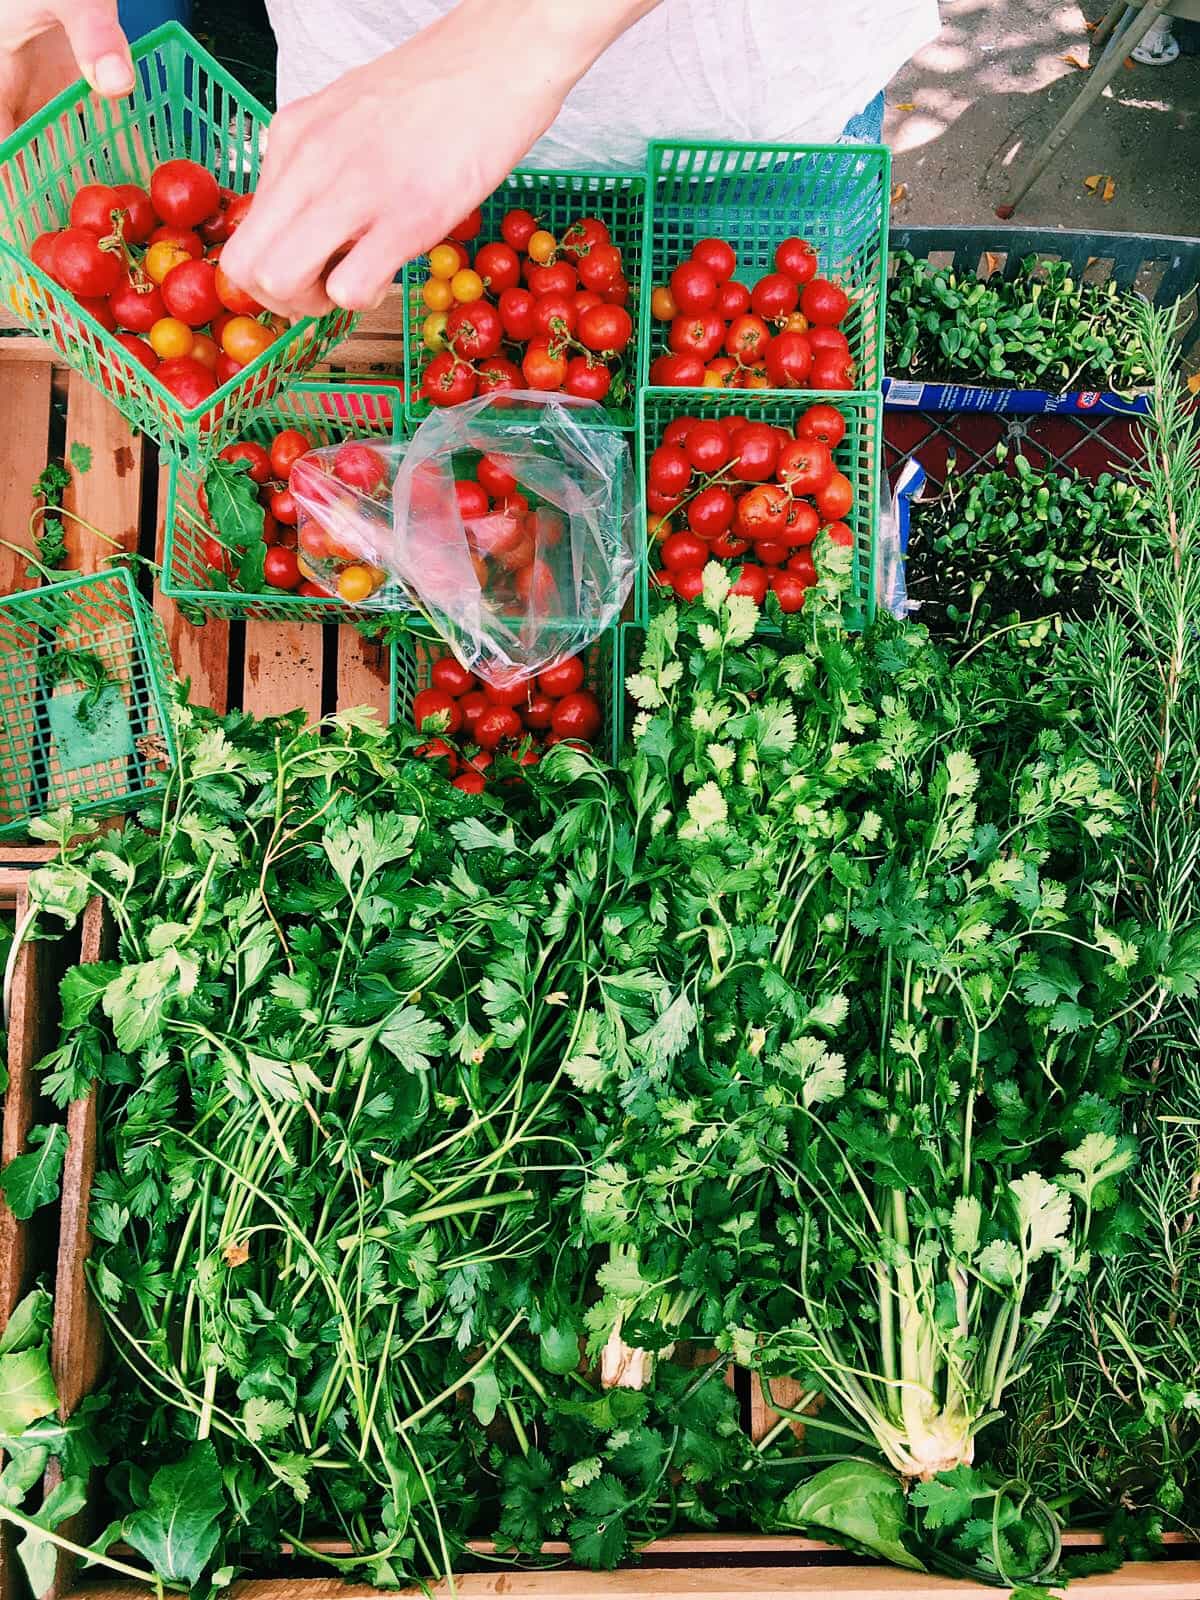 Hands putting tomatoes into green baskets. 